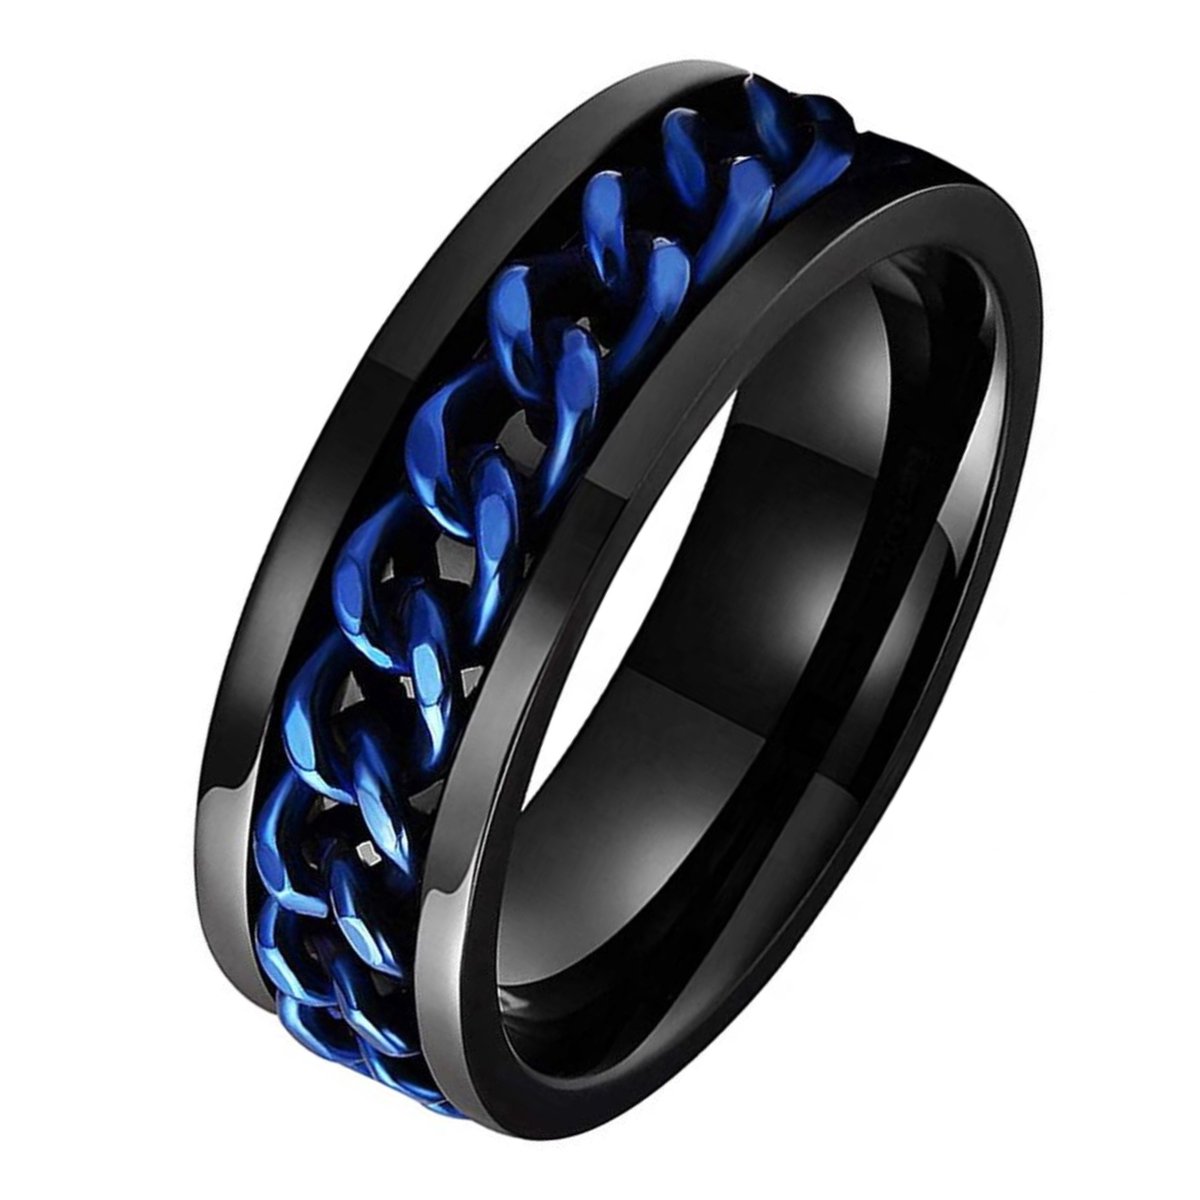 Anxiety Ring - (Kettinkje) - Stress Ring - Fidget Ring - Anxiety Ring For Finger - Draaibare Ring - Spinning Ring - Zwart-Blauw - (18.50mm / maat 58)